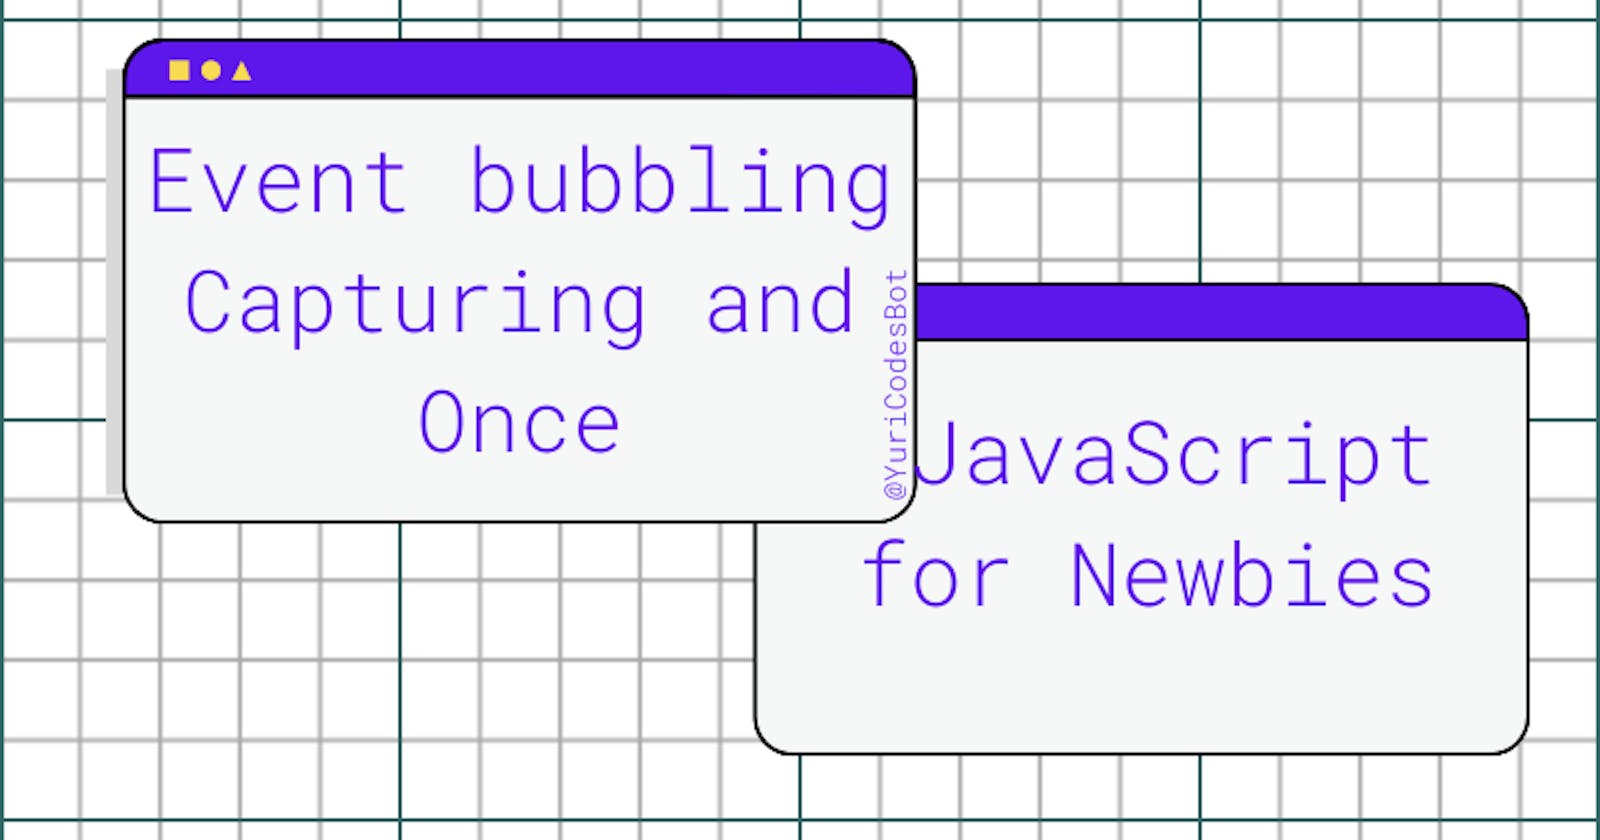 Event Bubbling, Capturing and Once in JavaScript.